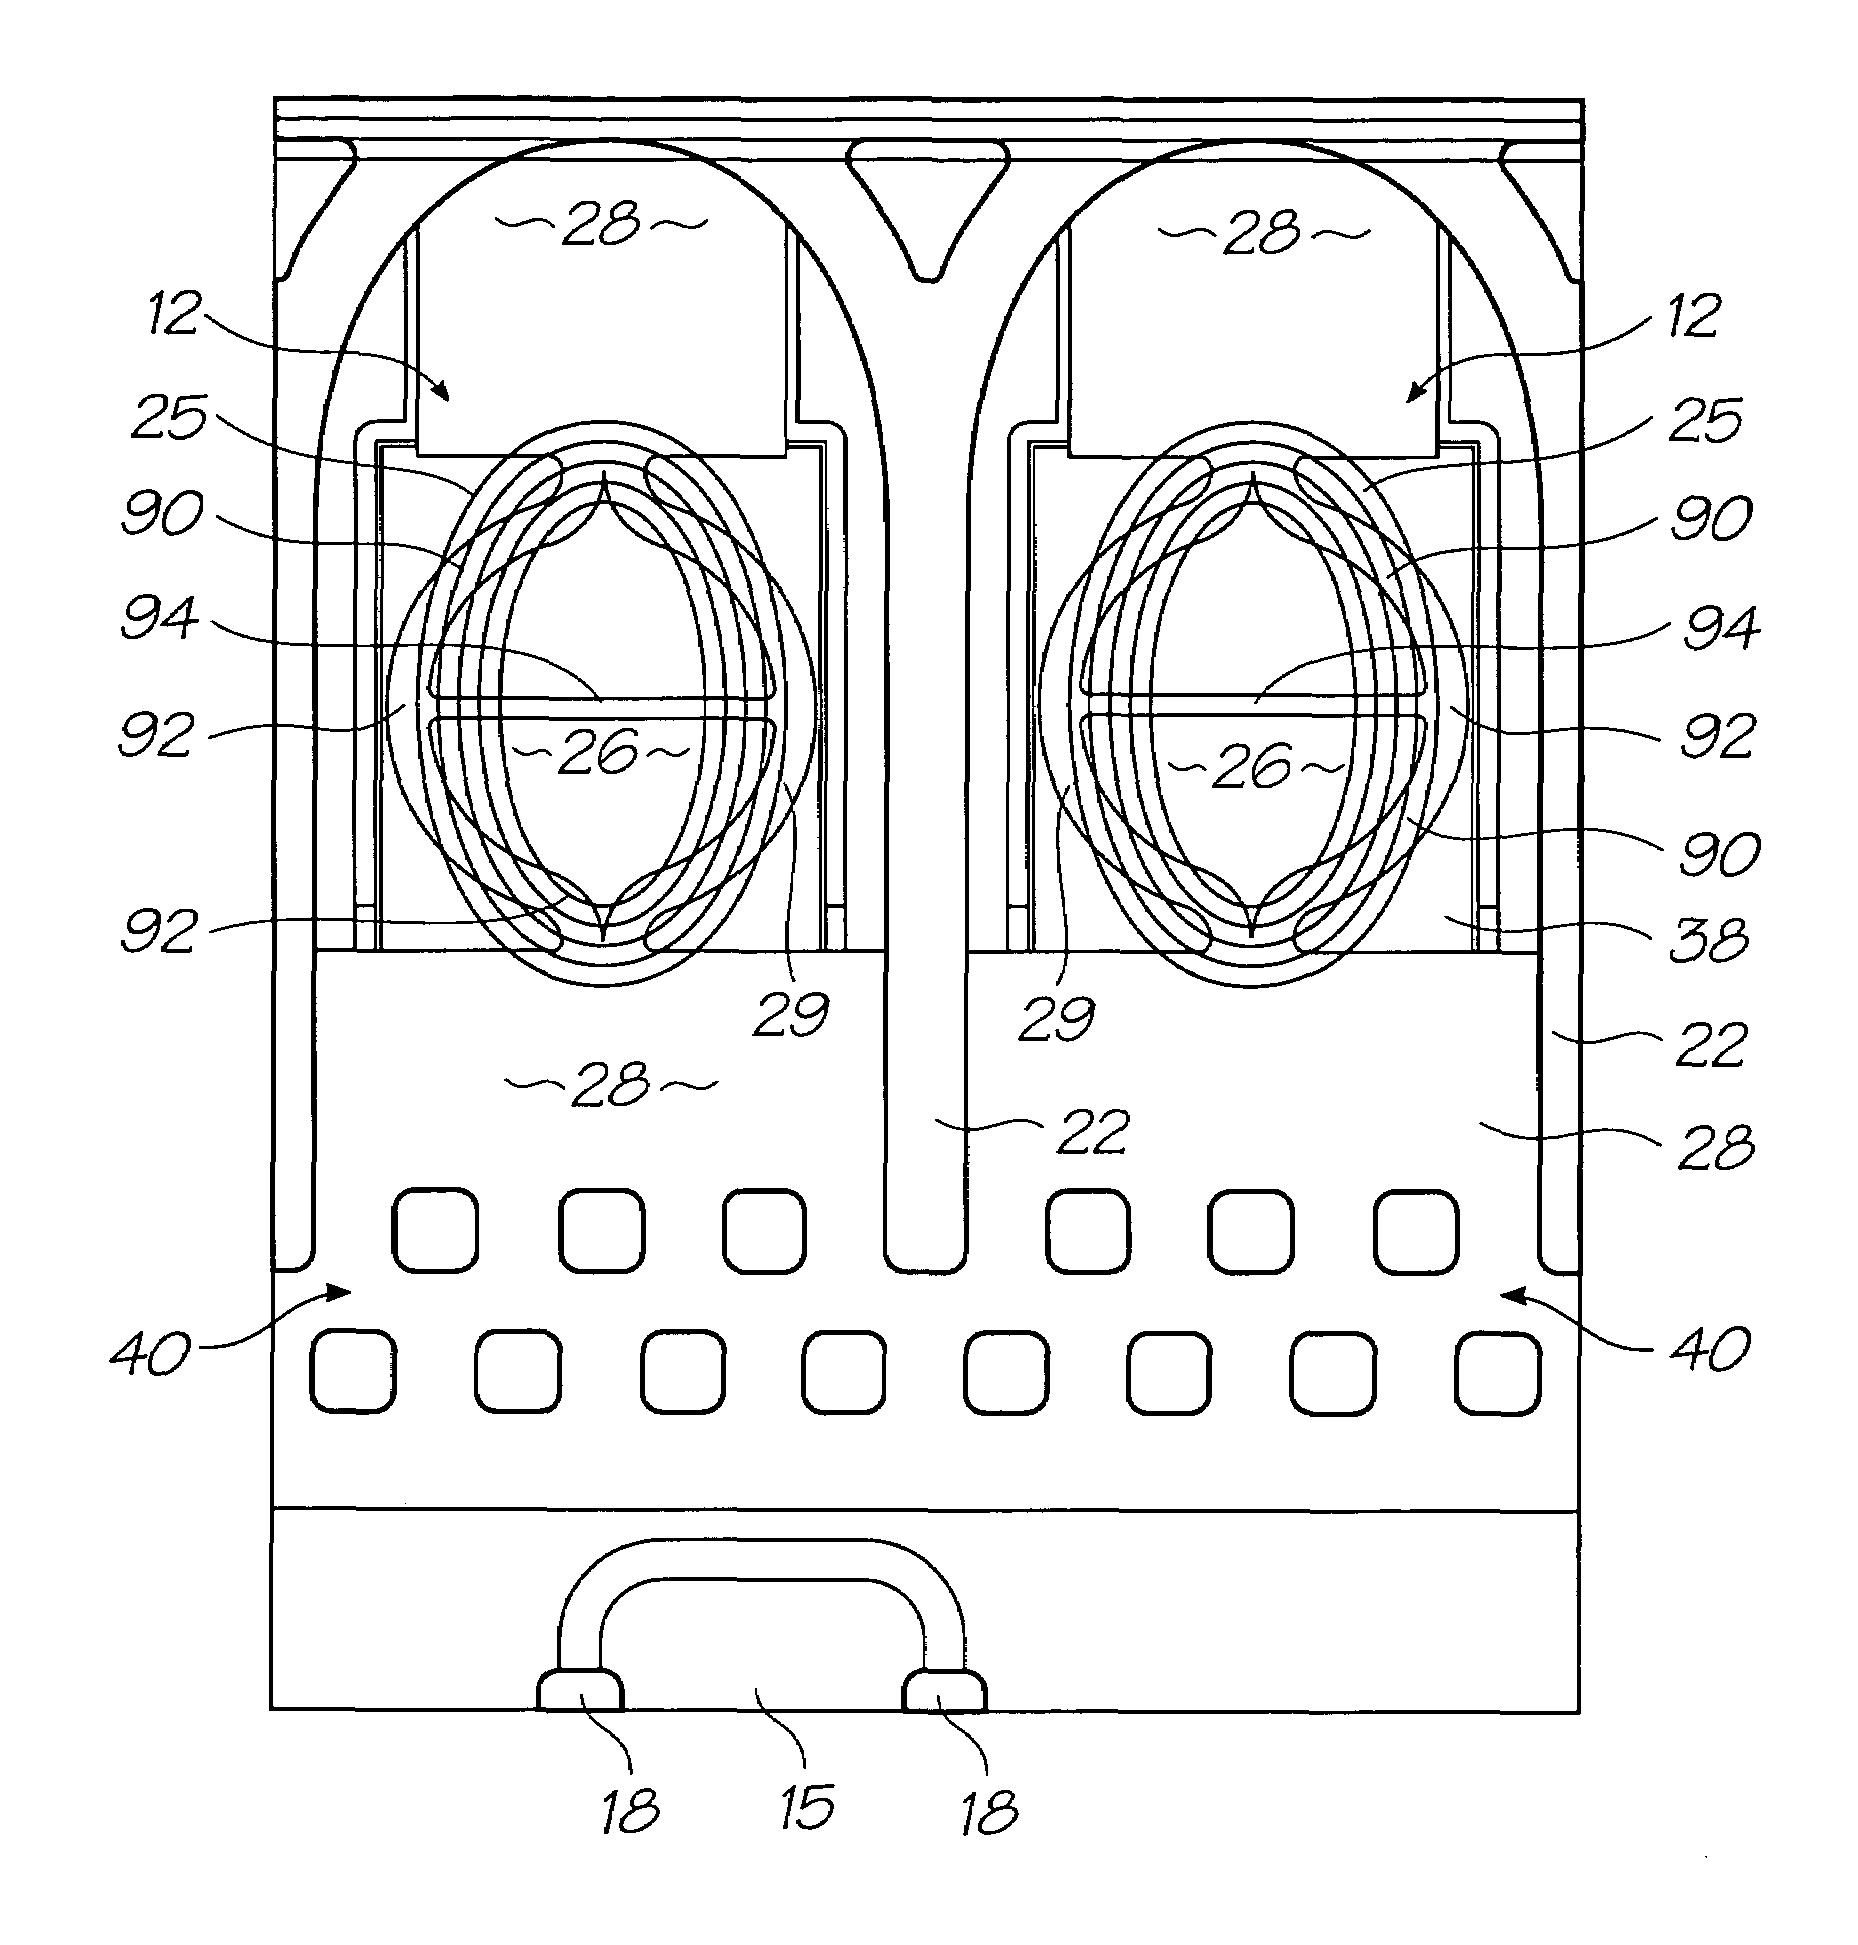 Inkjet printhead with multiple heater elements and cross bracing